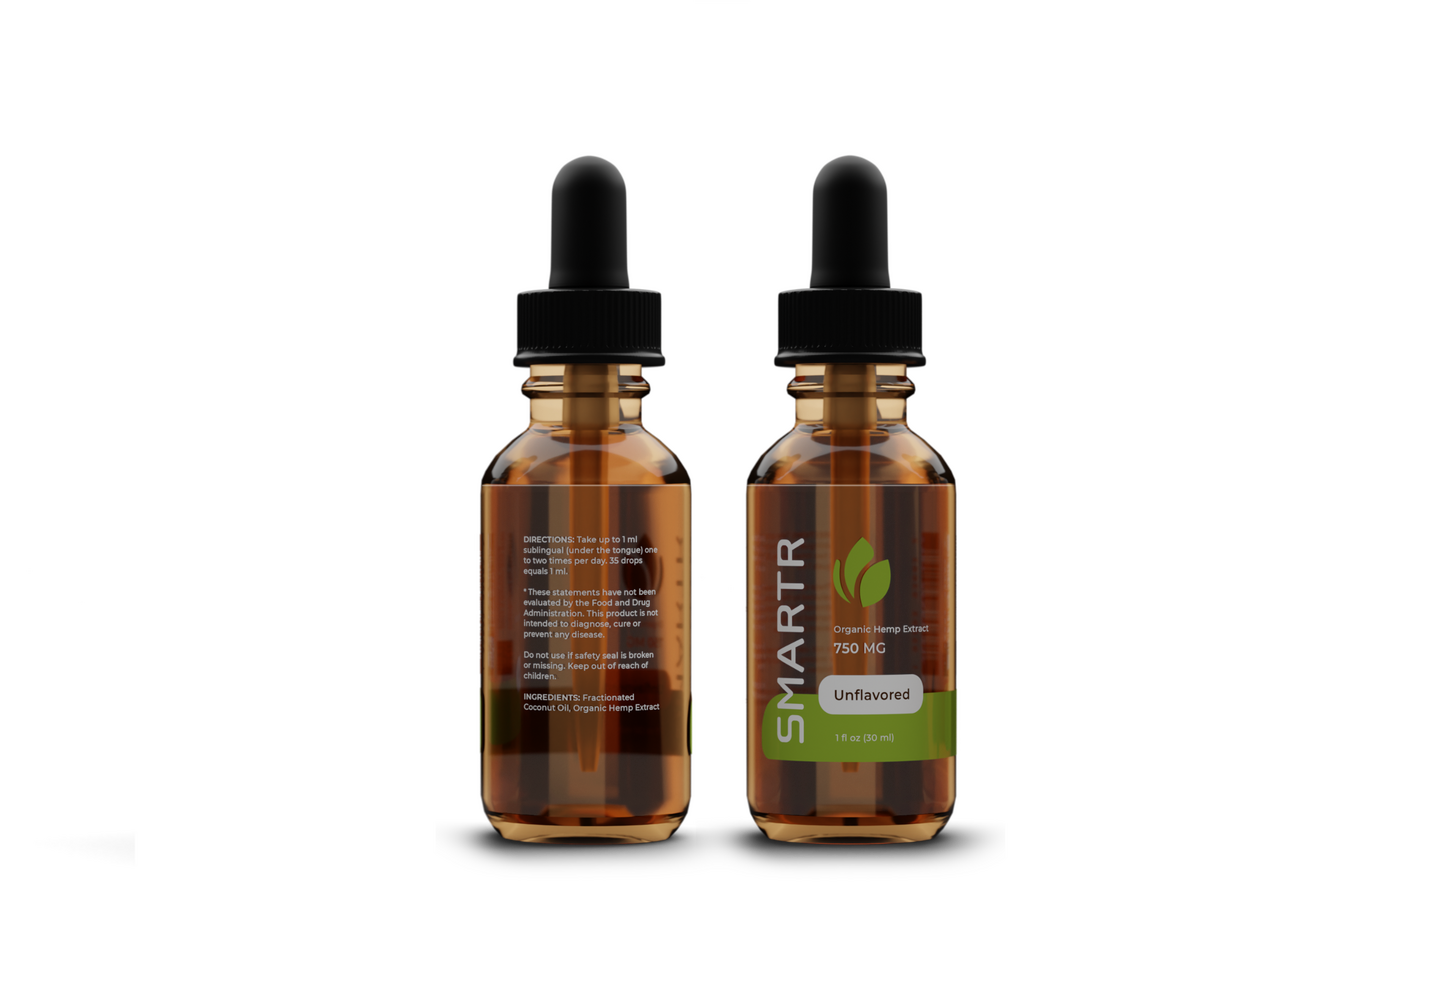 unflavored hemp oil tincture sitting on invisible backdrop